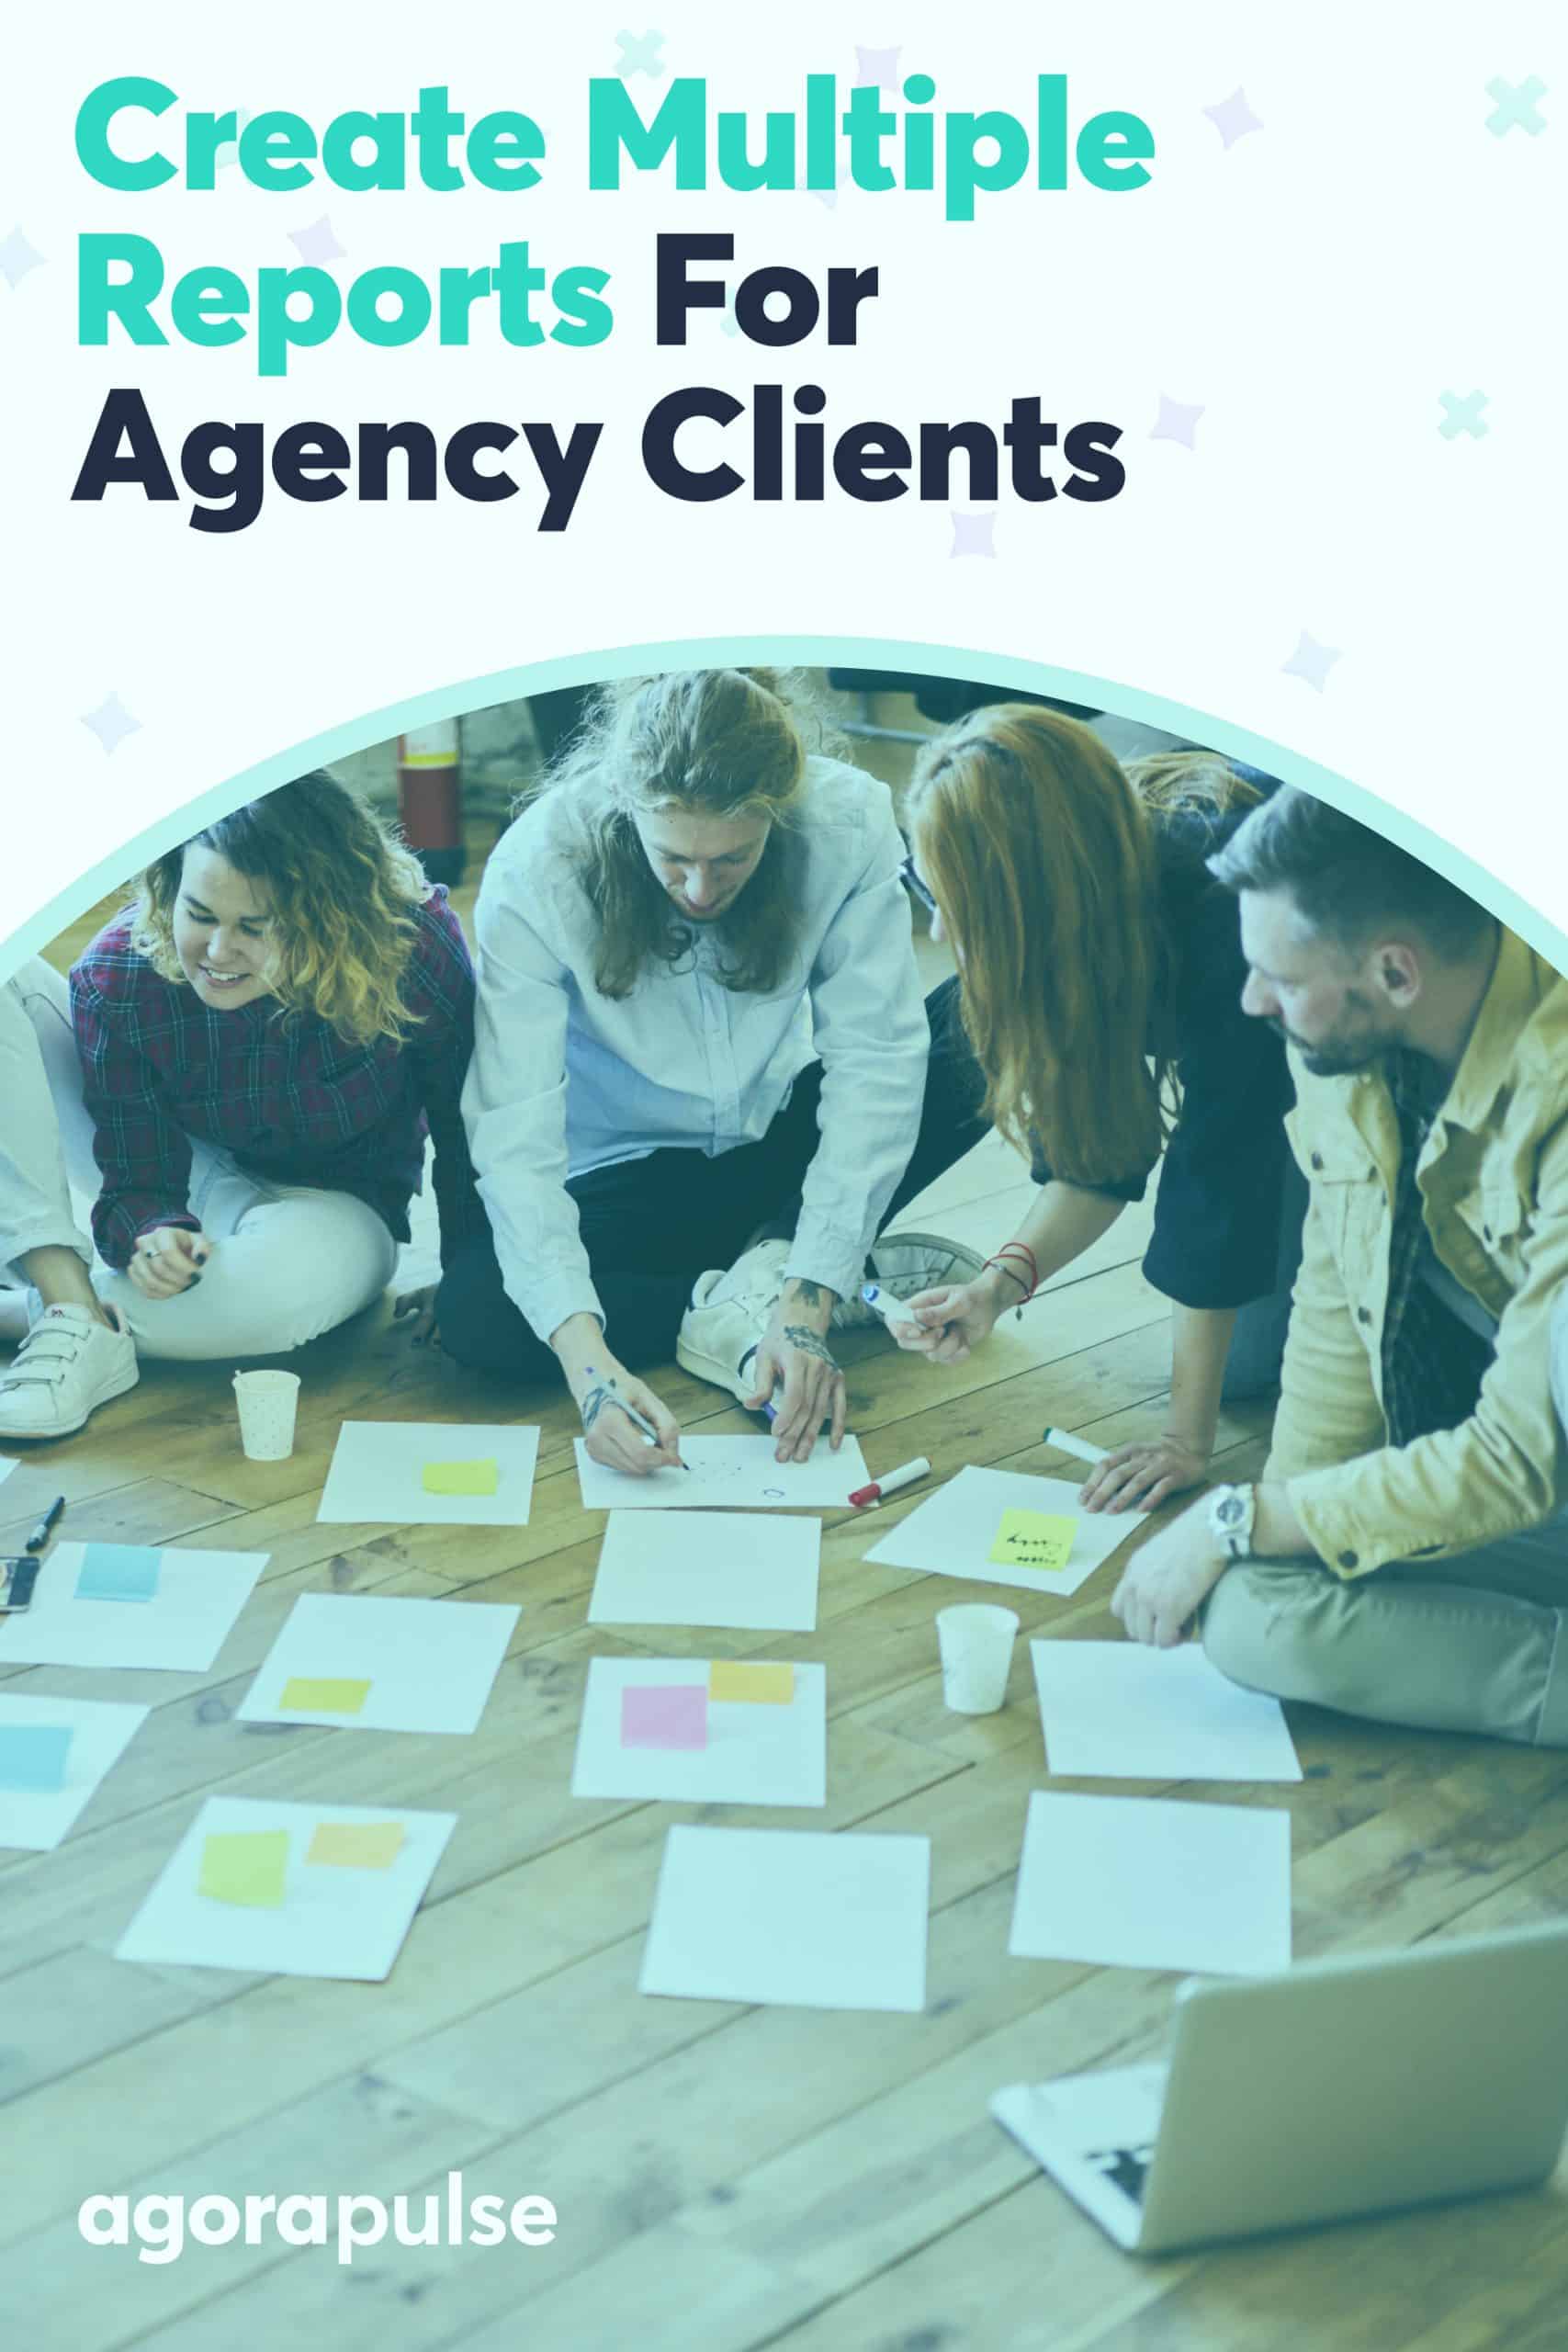 How to Easily Create Multiple Reports for Agency Clients That Impress Them